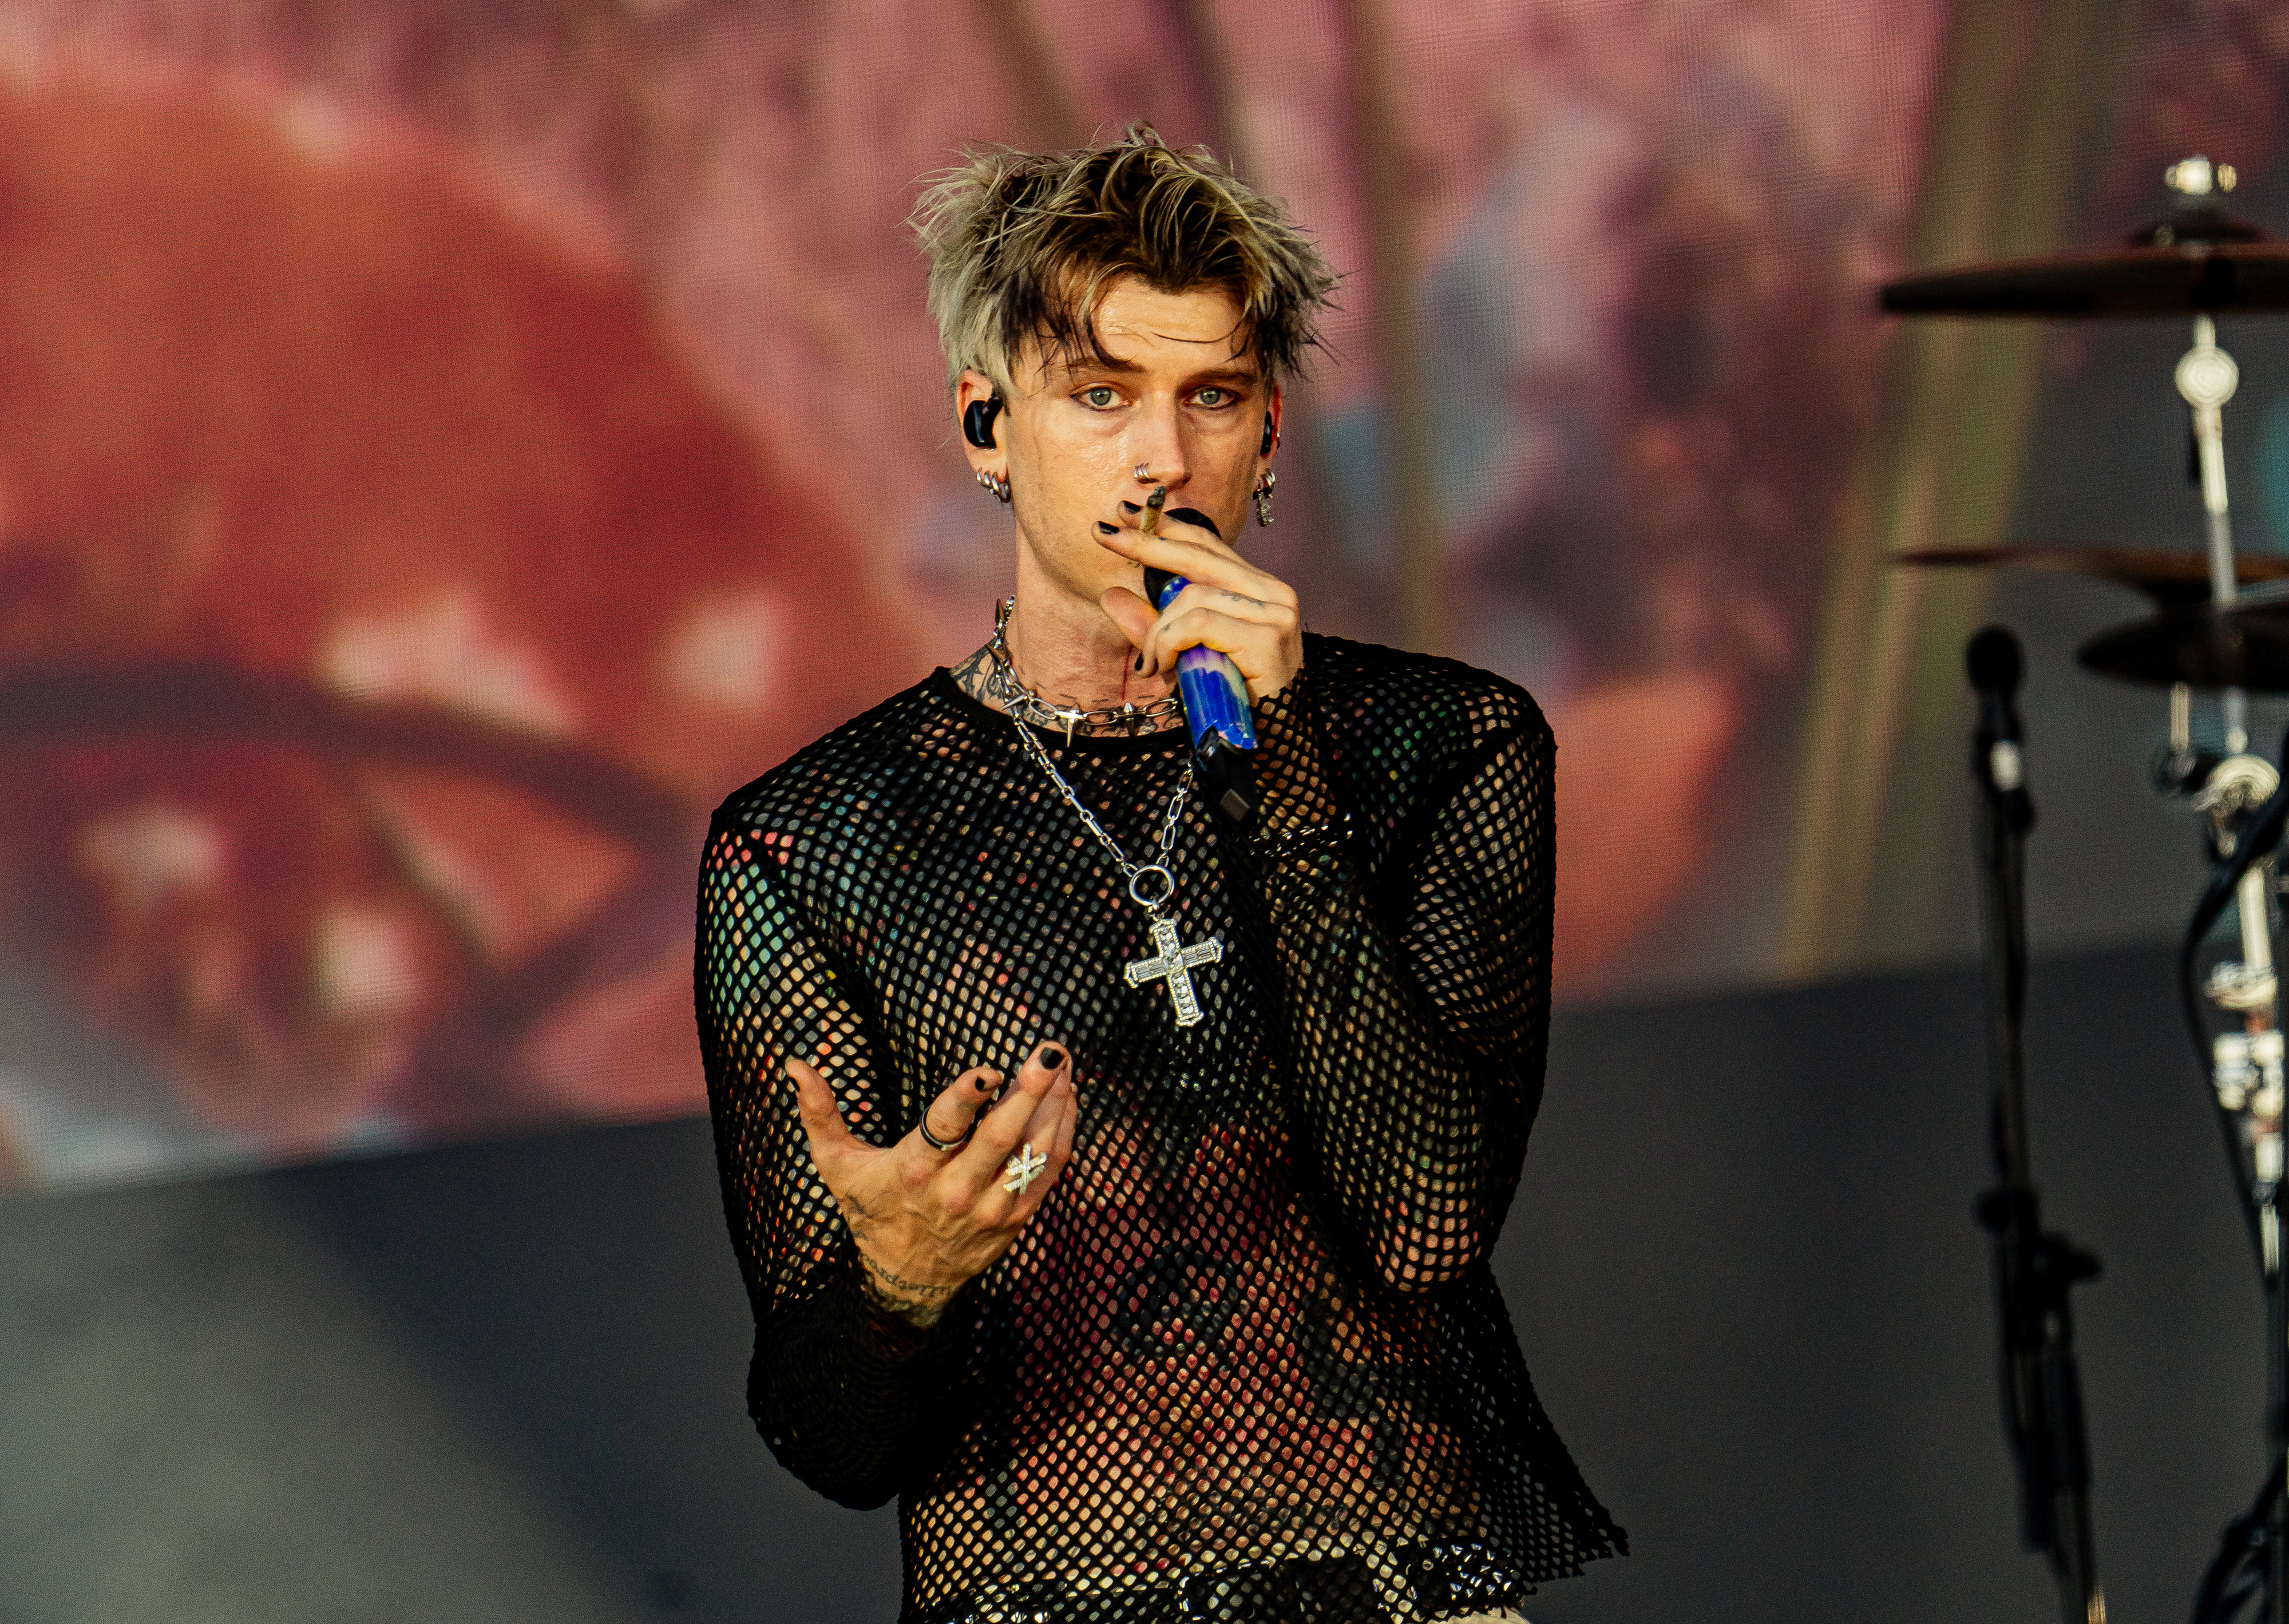 MGK in a mesh top performing onstage with a microphone